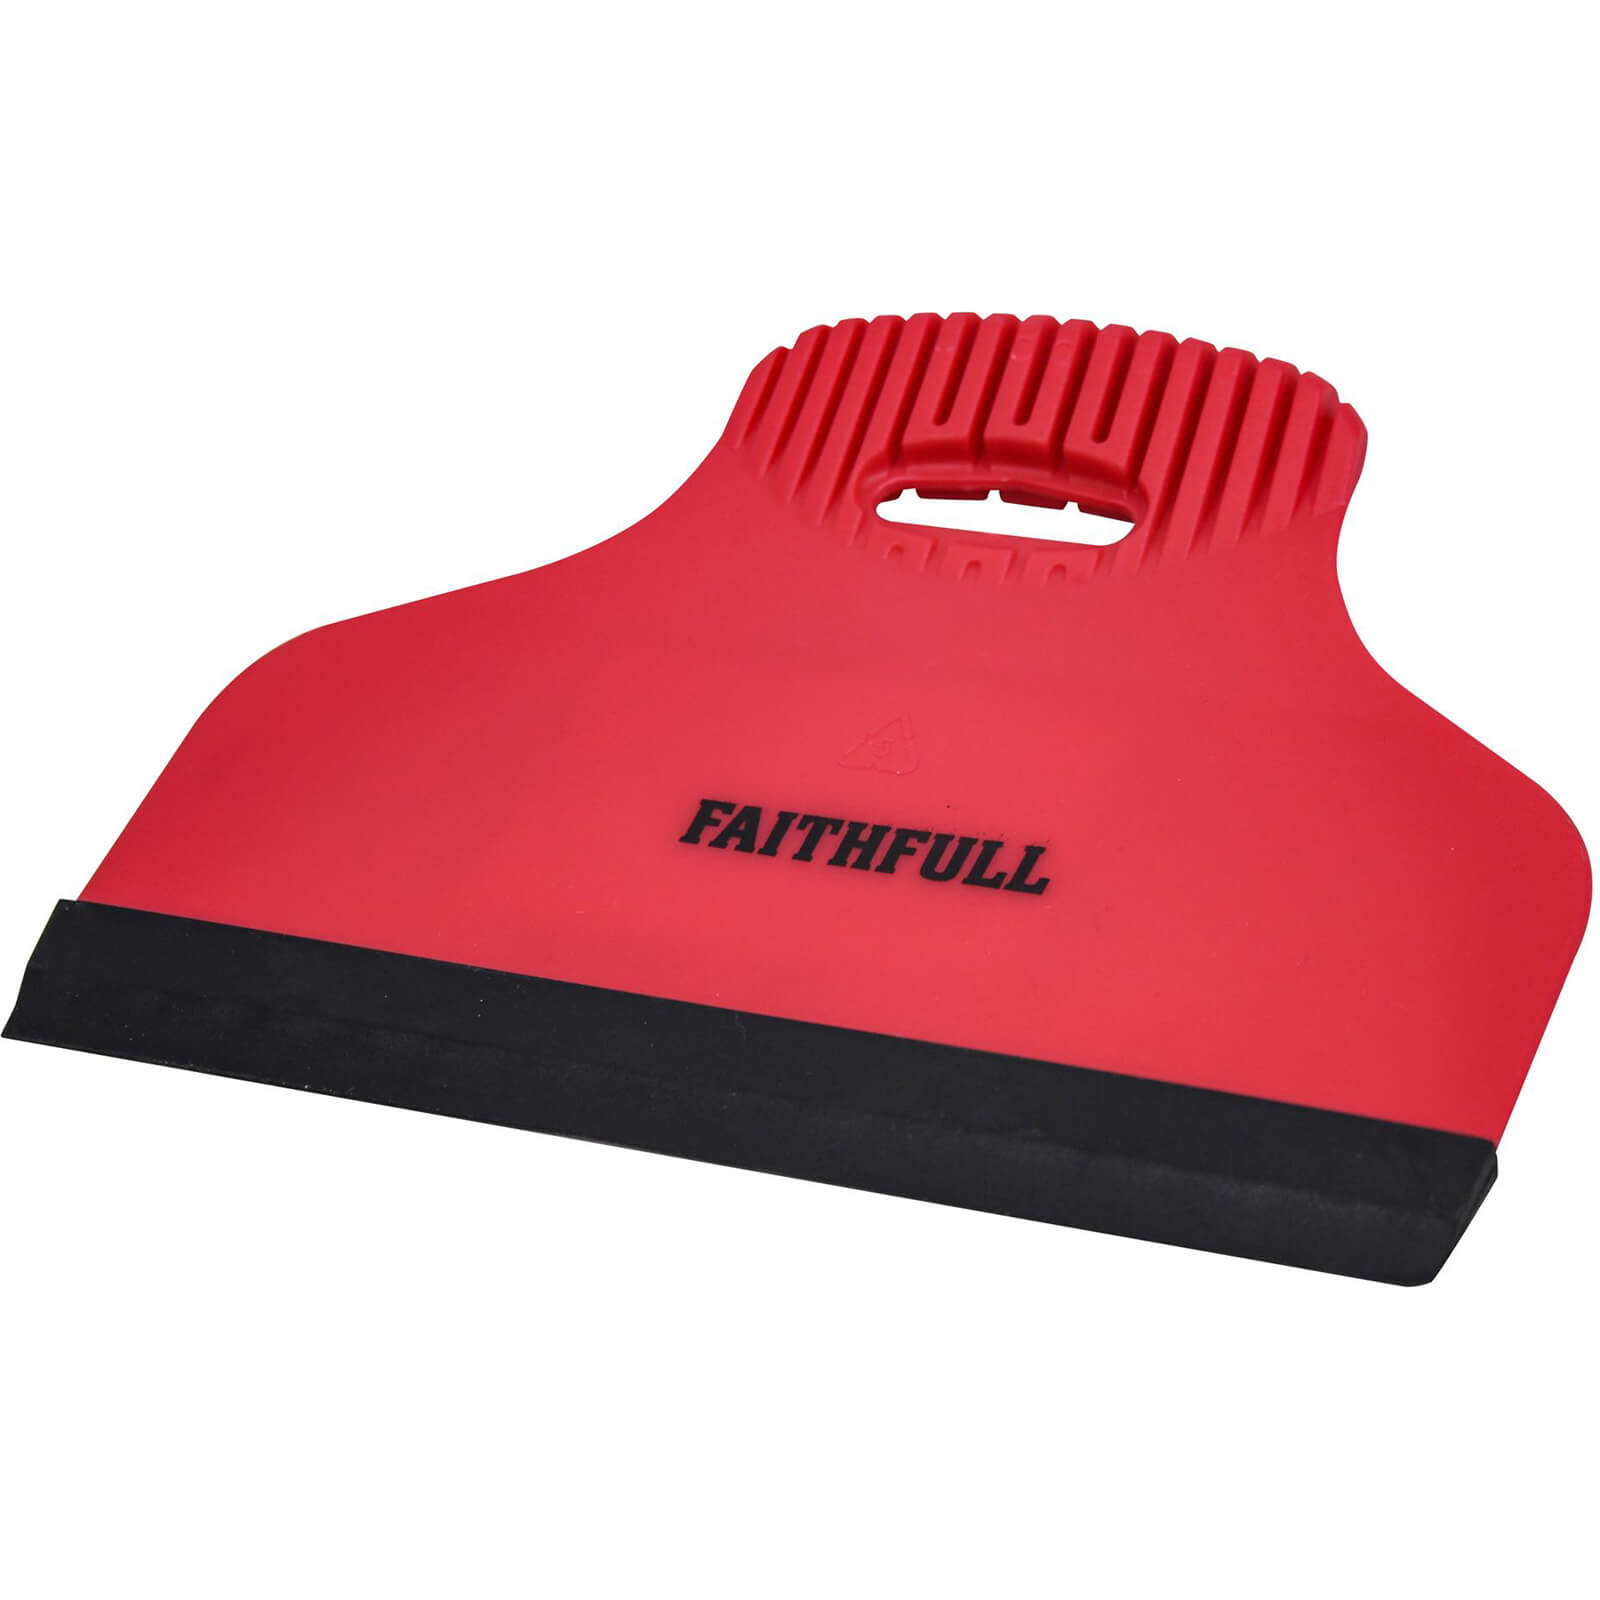 Image of Faithfull Tile Squeegee 190mm